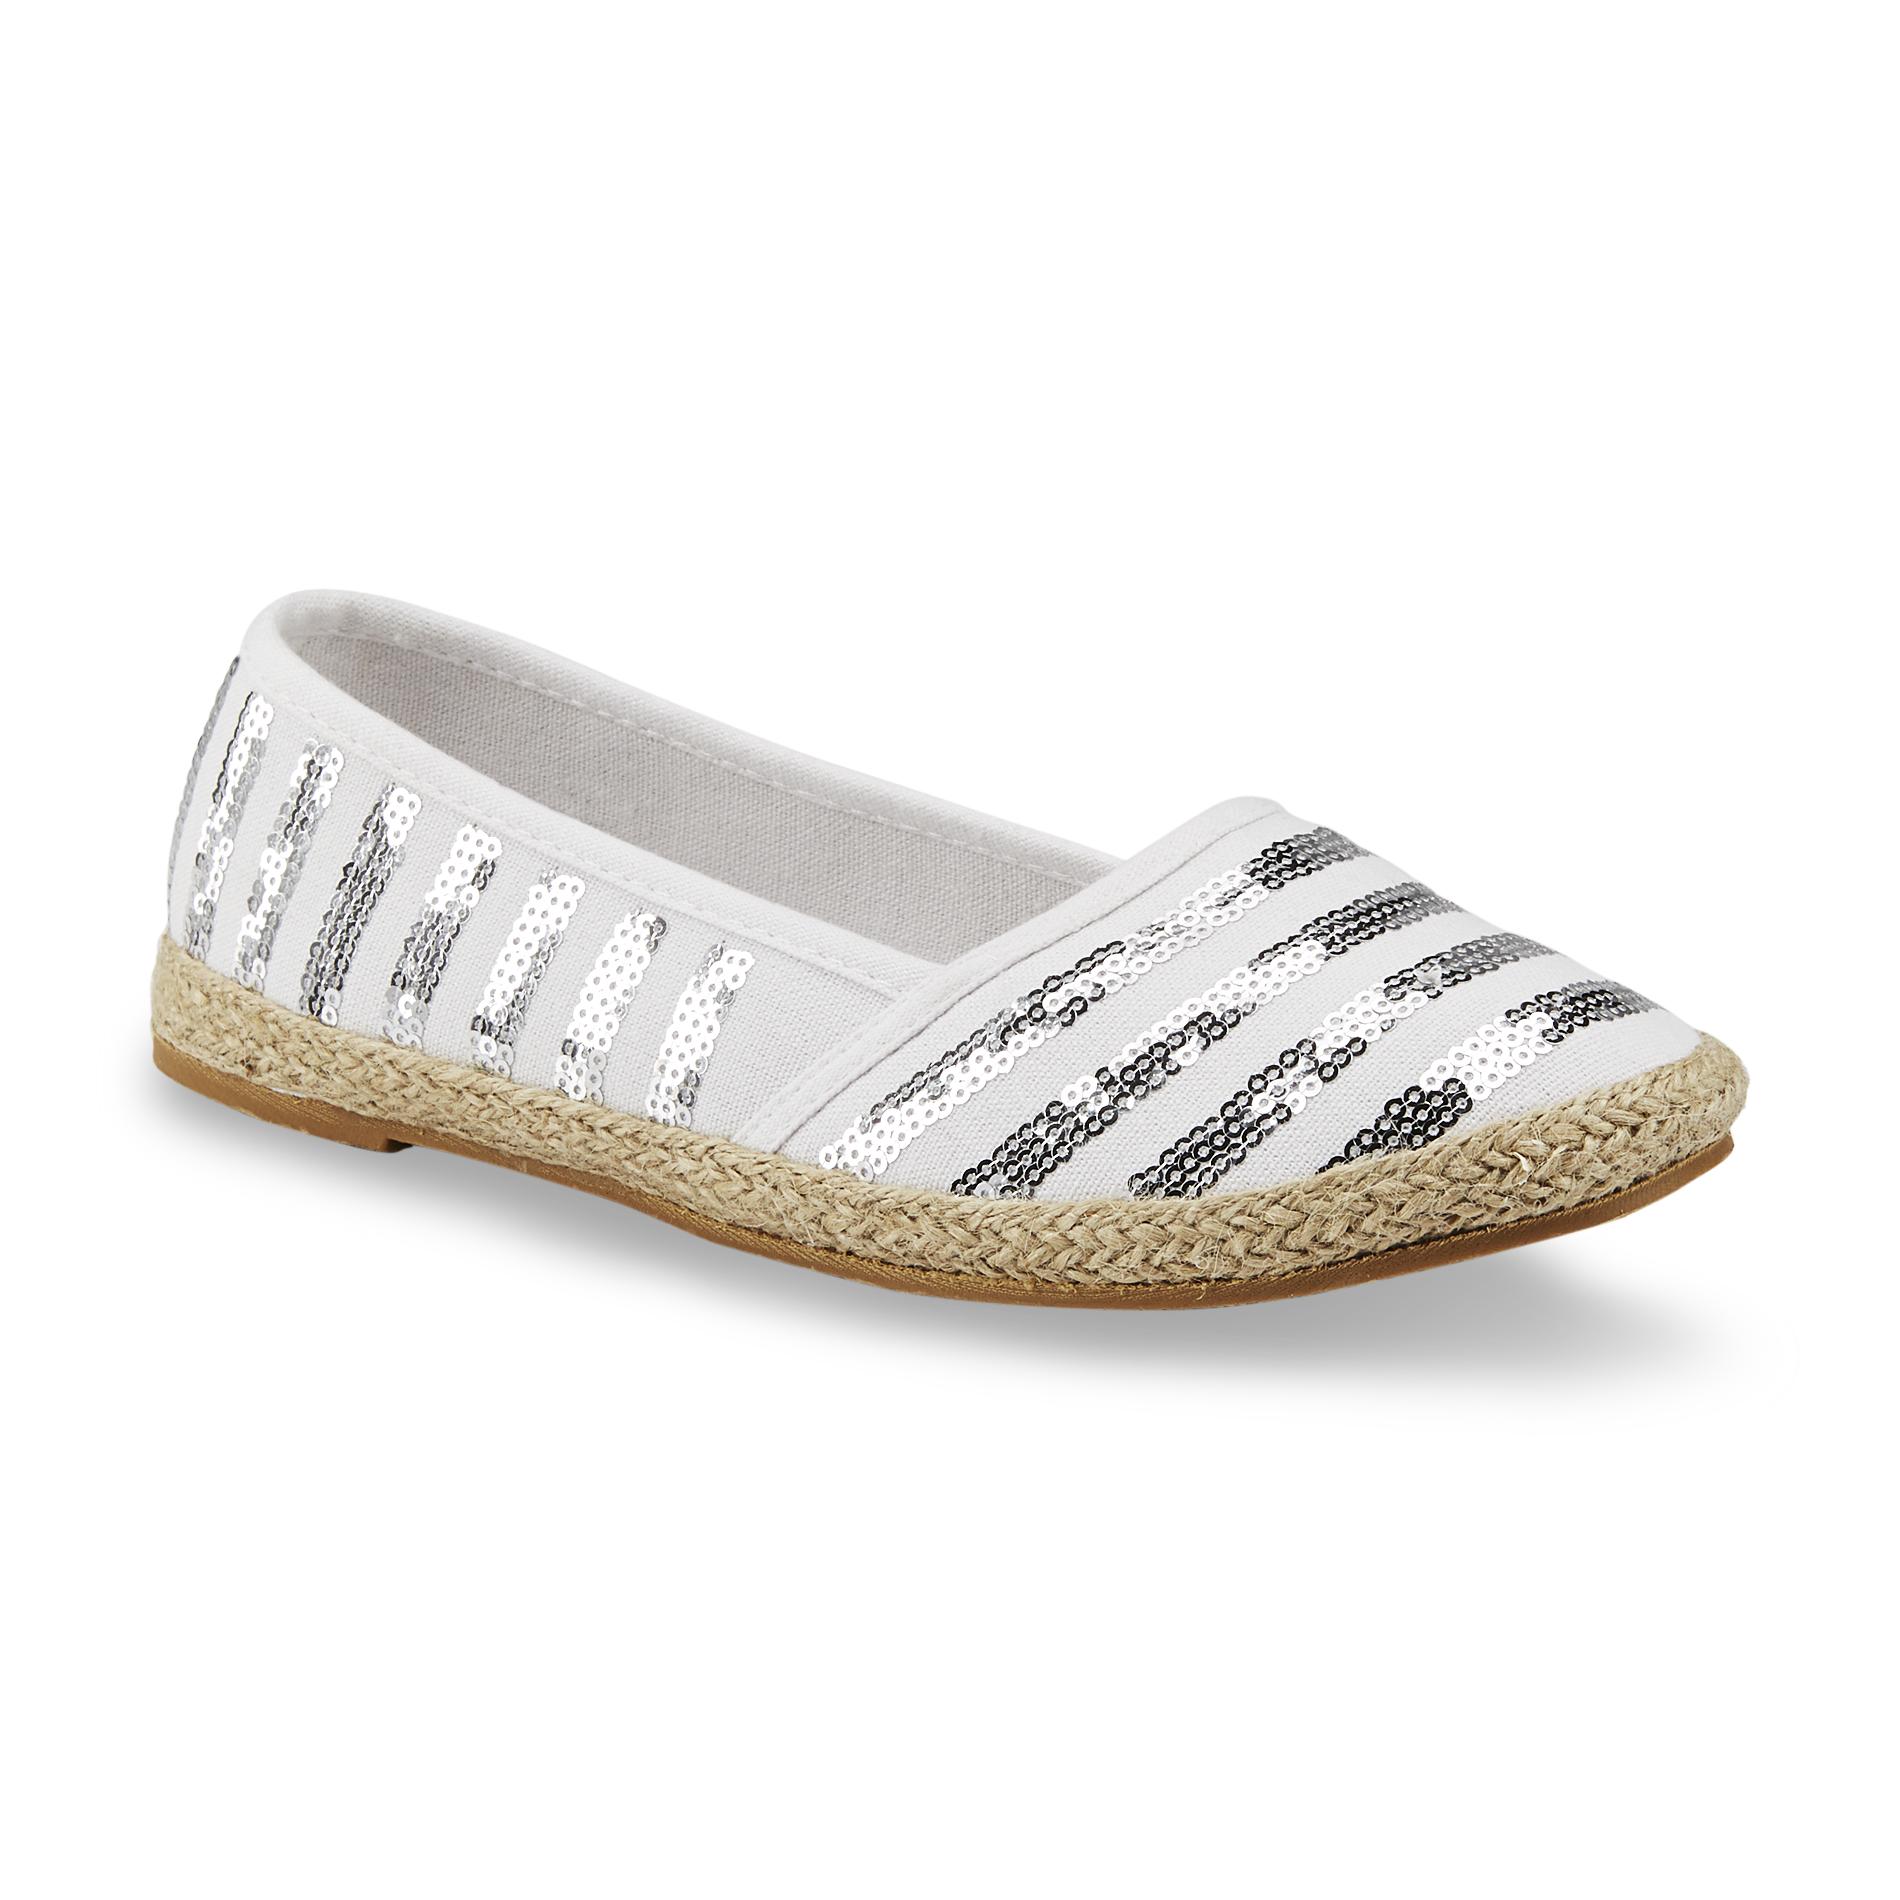 Twisted Women's Daly White/Silver Espadrille Flat